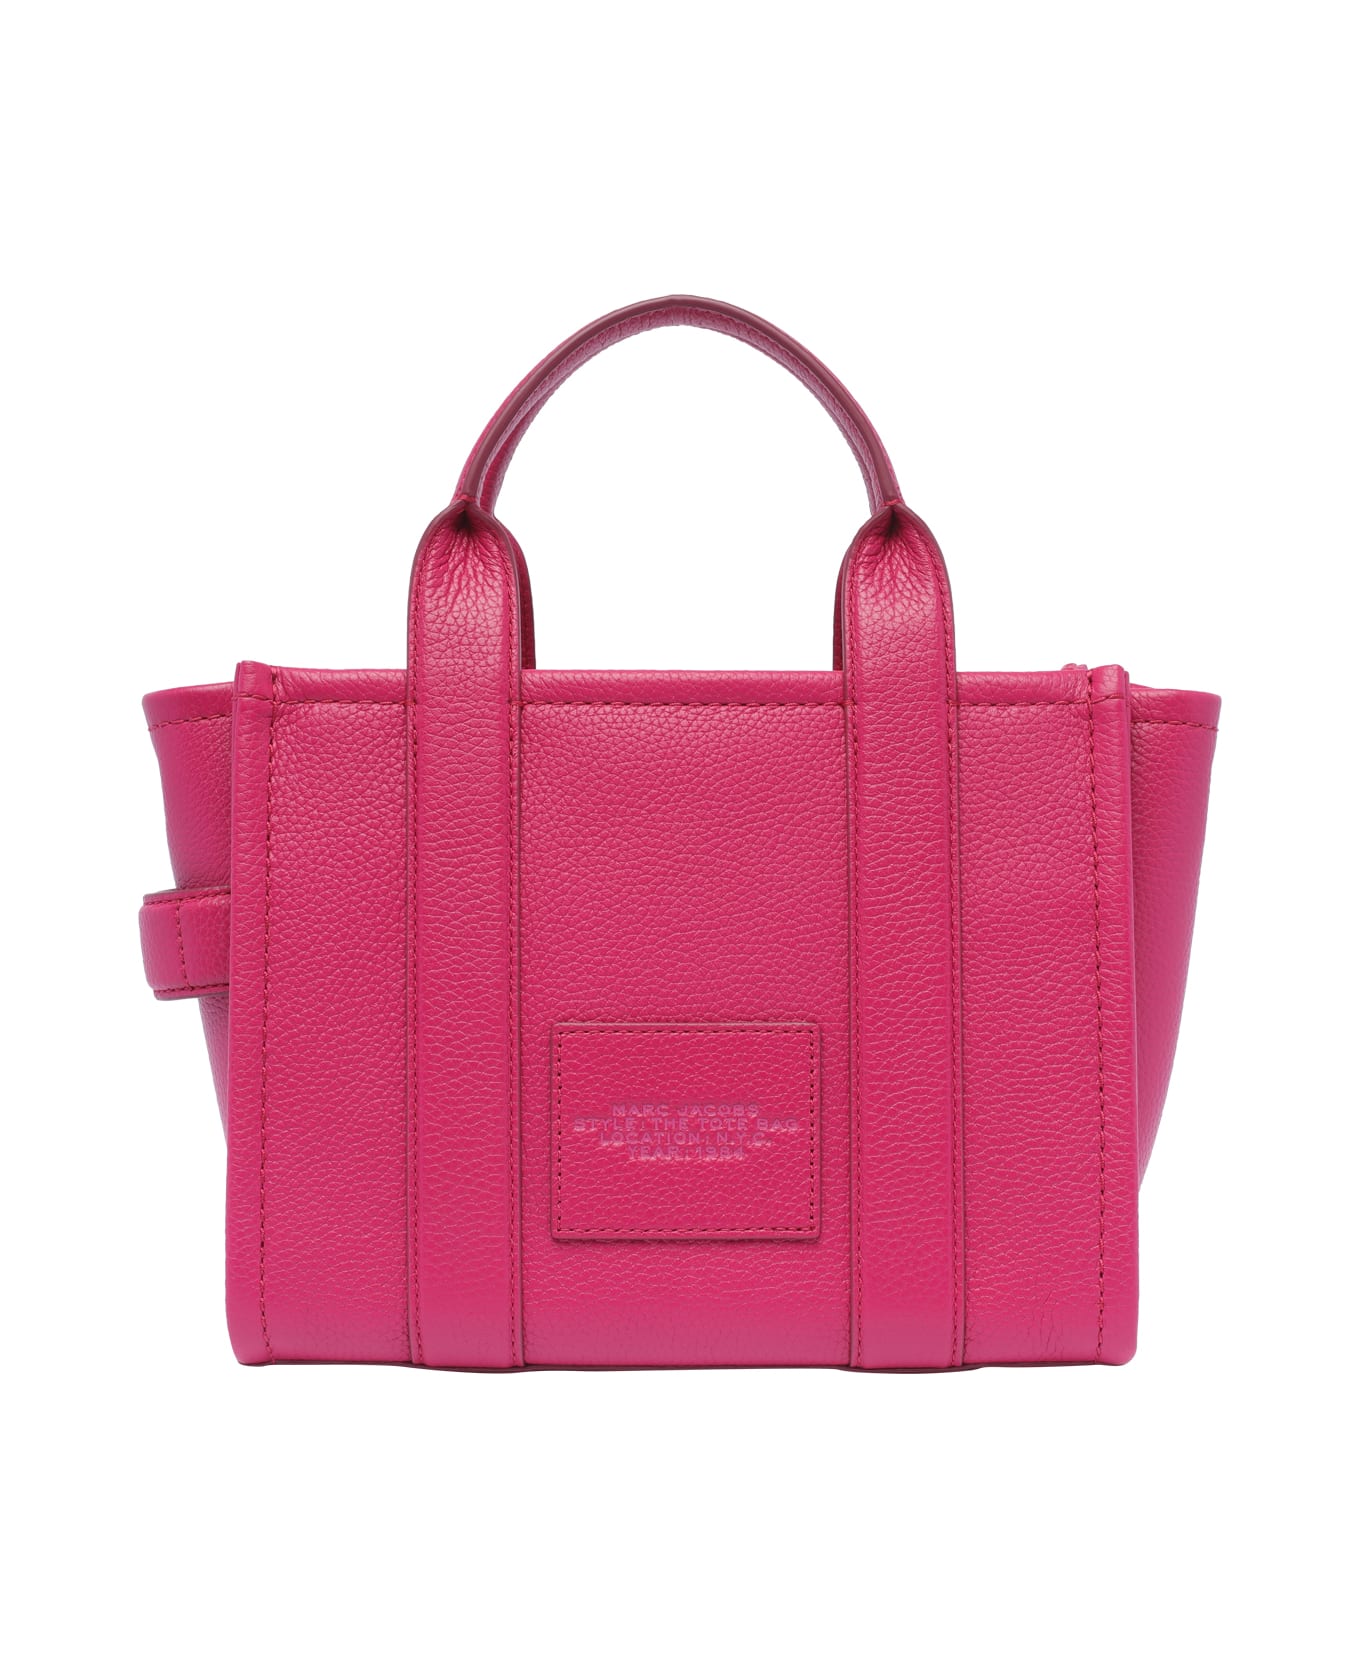 Marc Jacobs The Small Tote Bag - Lipstick Pink トートバッグ